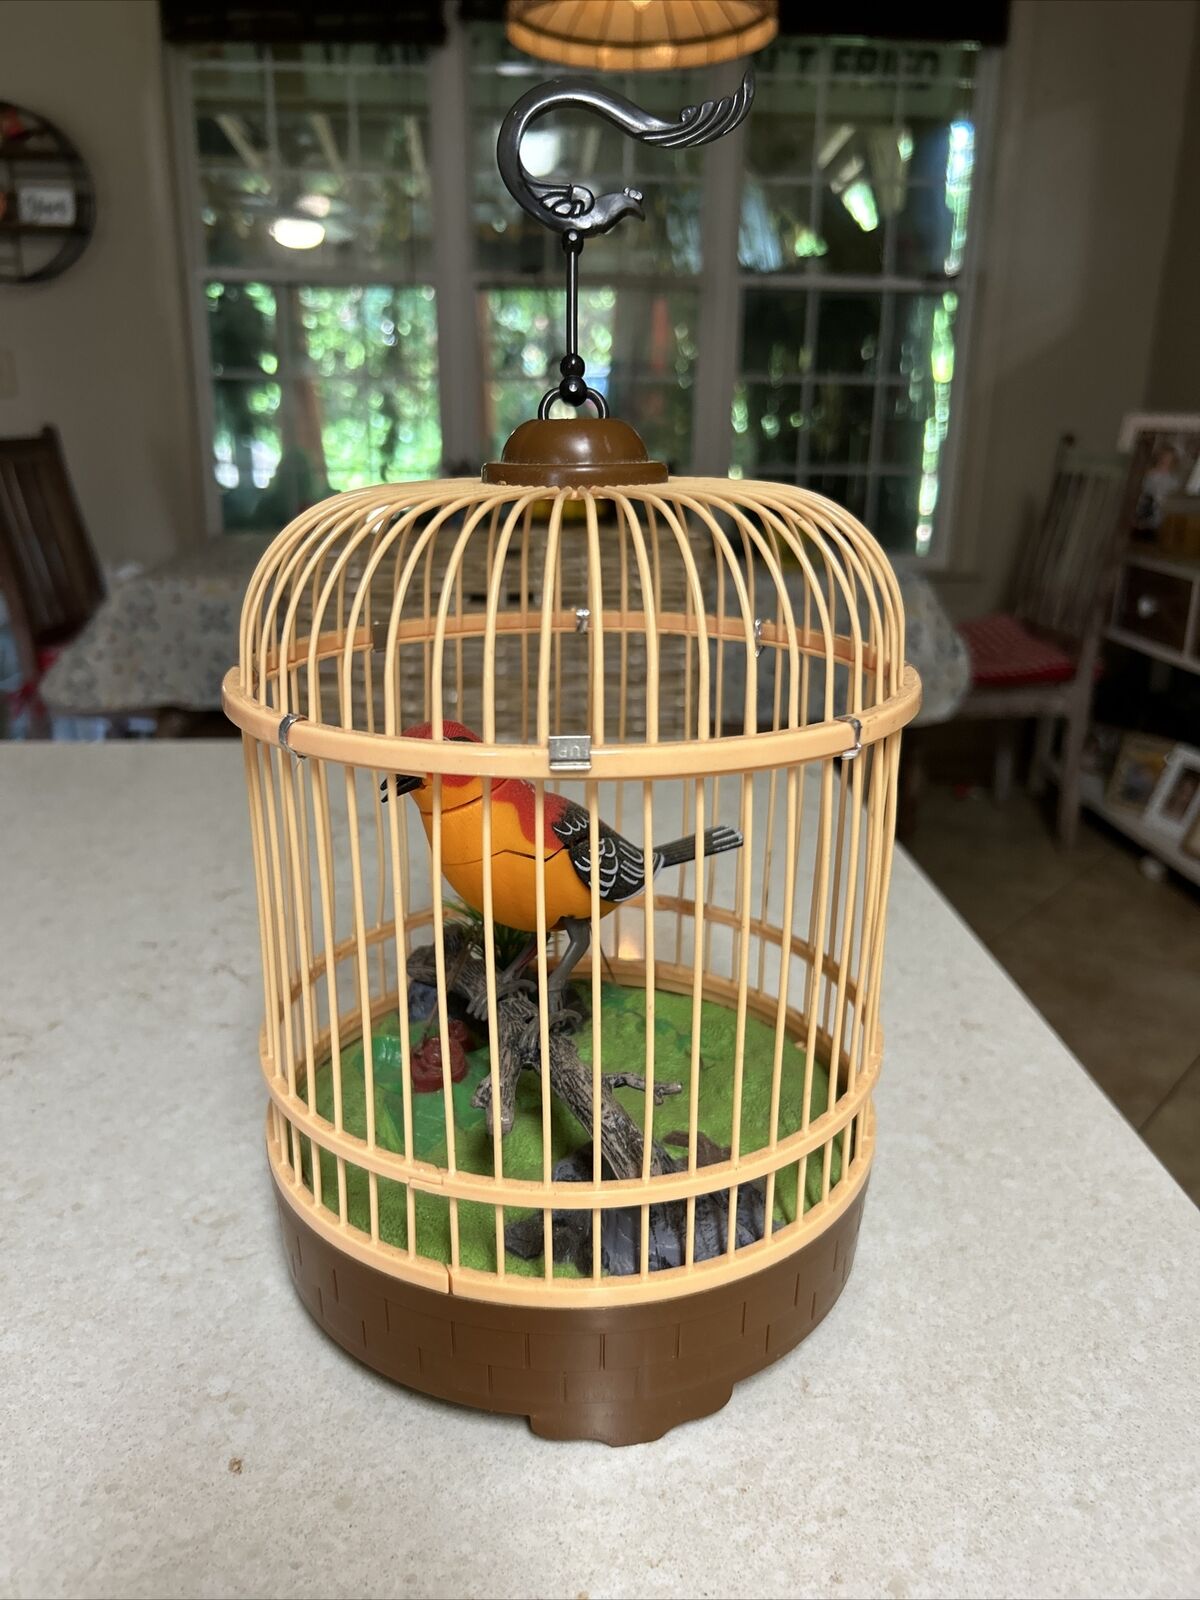 Realistic Singing Chirping Bird in Cage Sounds Movements Works Great Tested